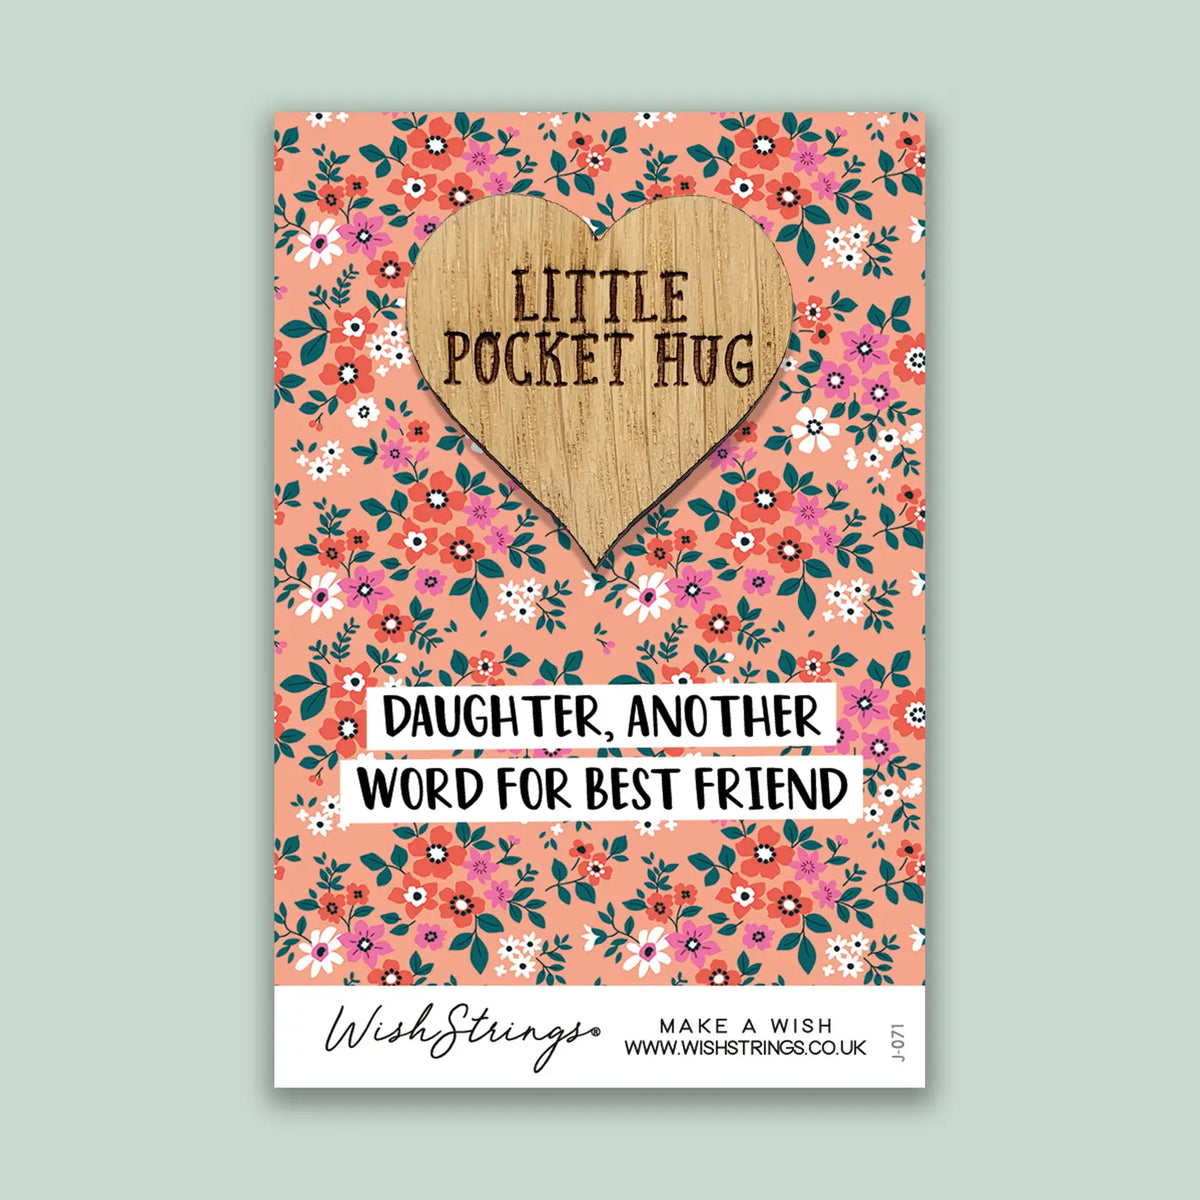 Daughter, Another Word for Best Friend | Little Pocket Hug